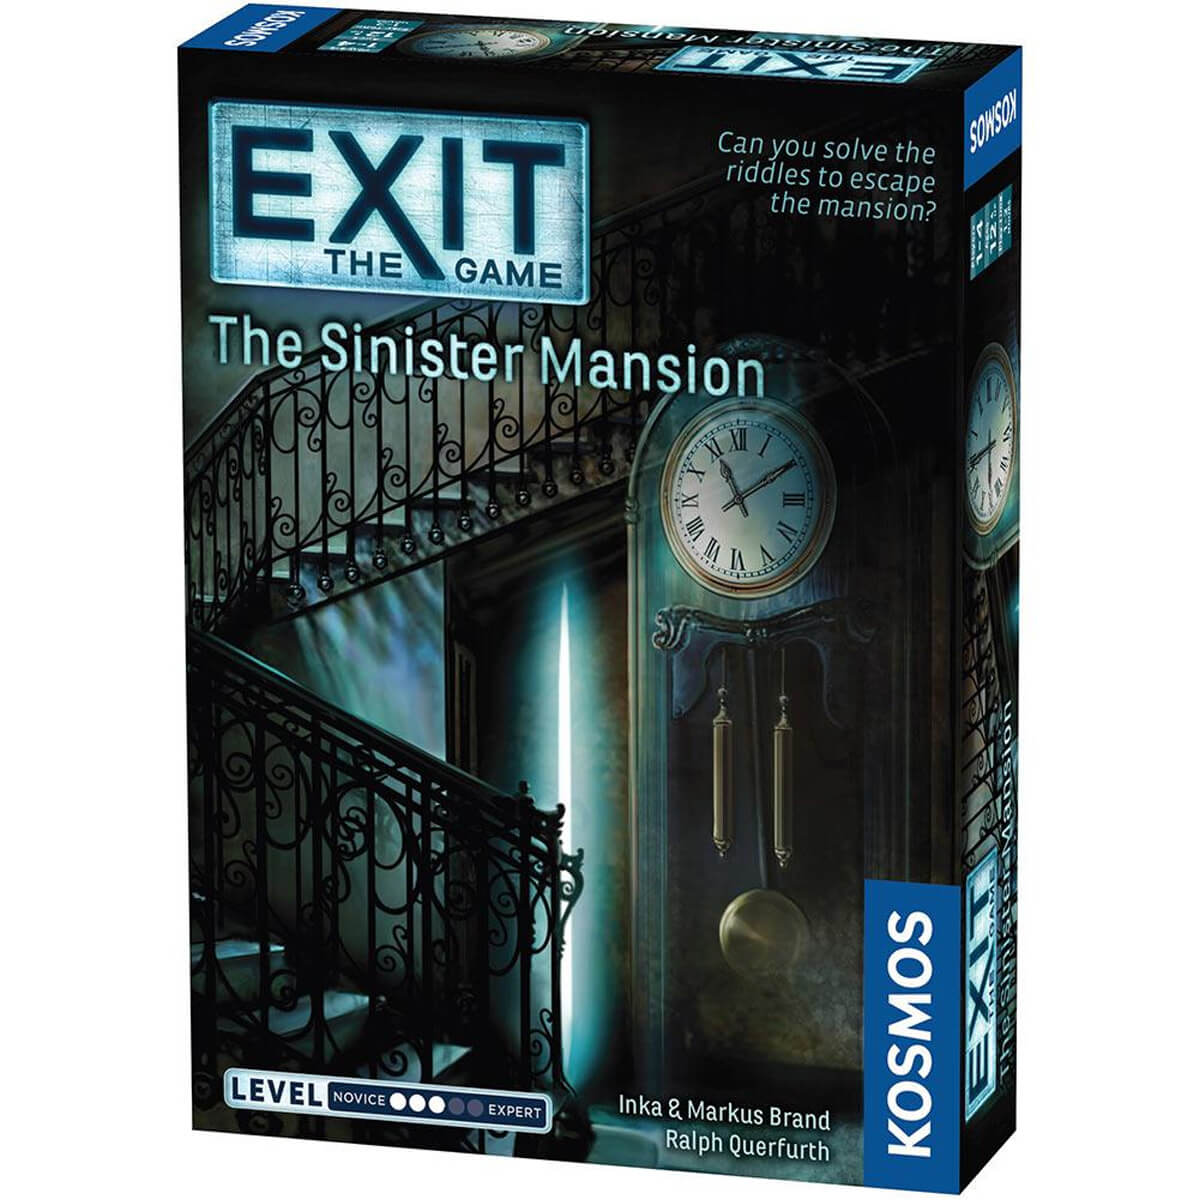 Exit: The Game - The Sinister Mansion.